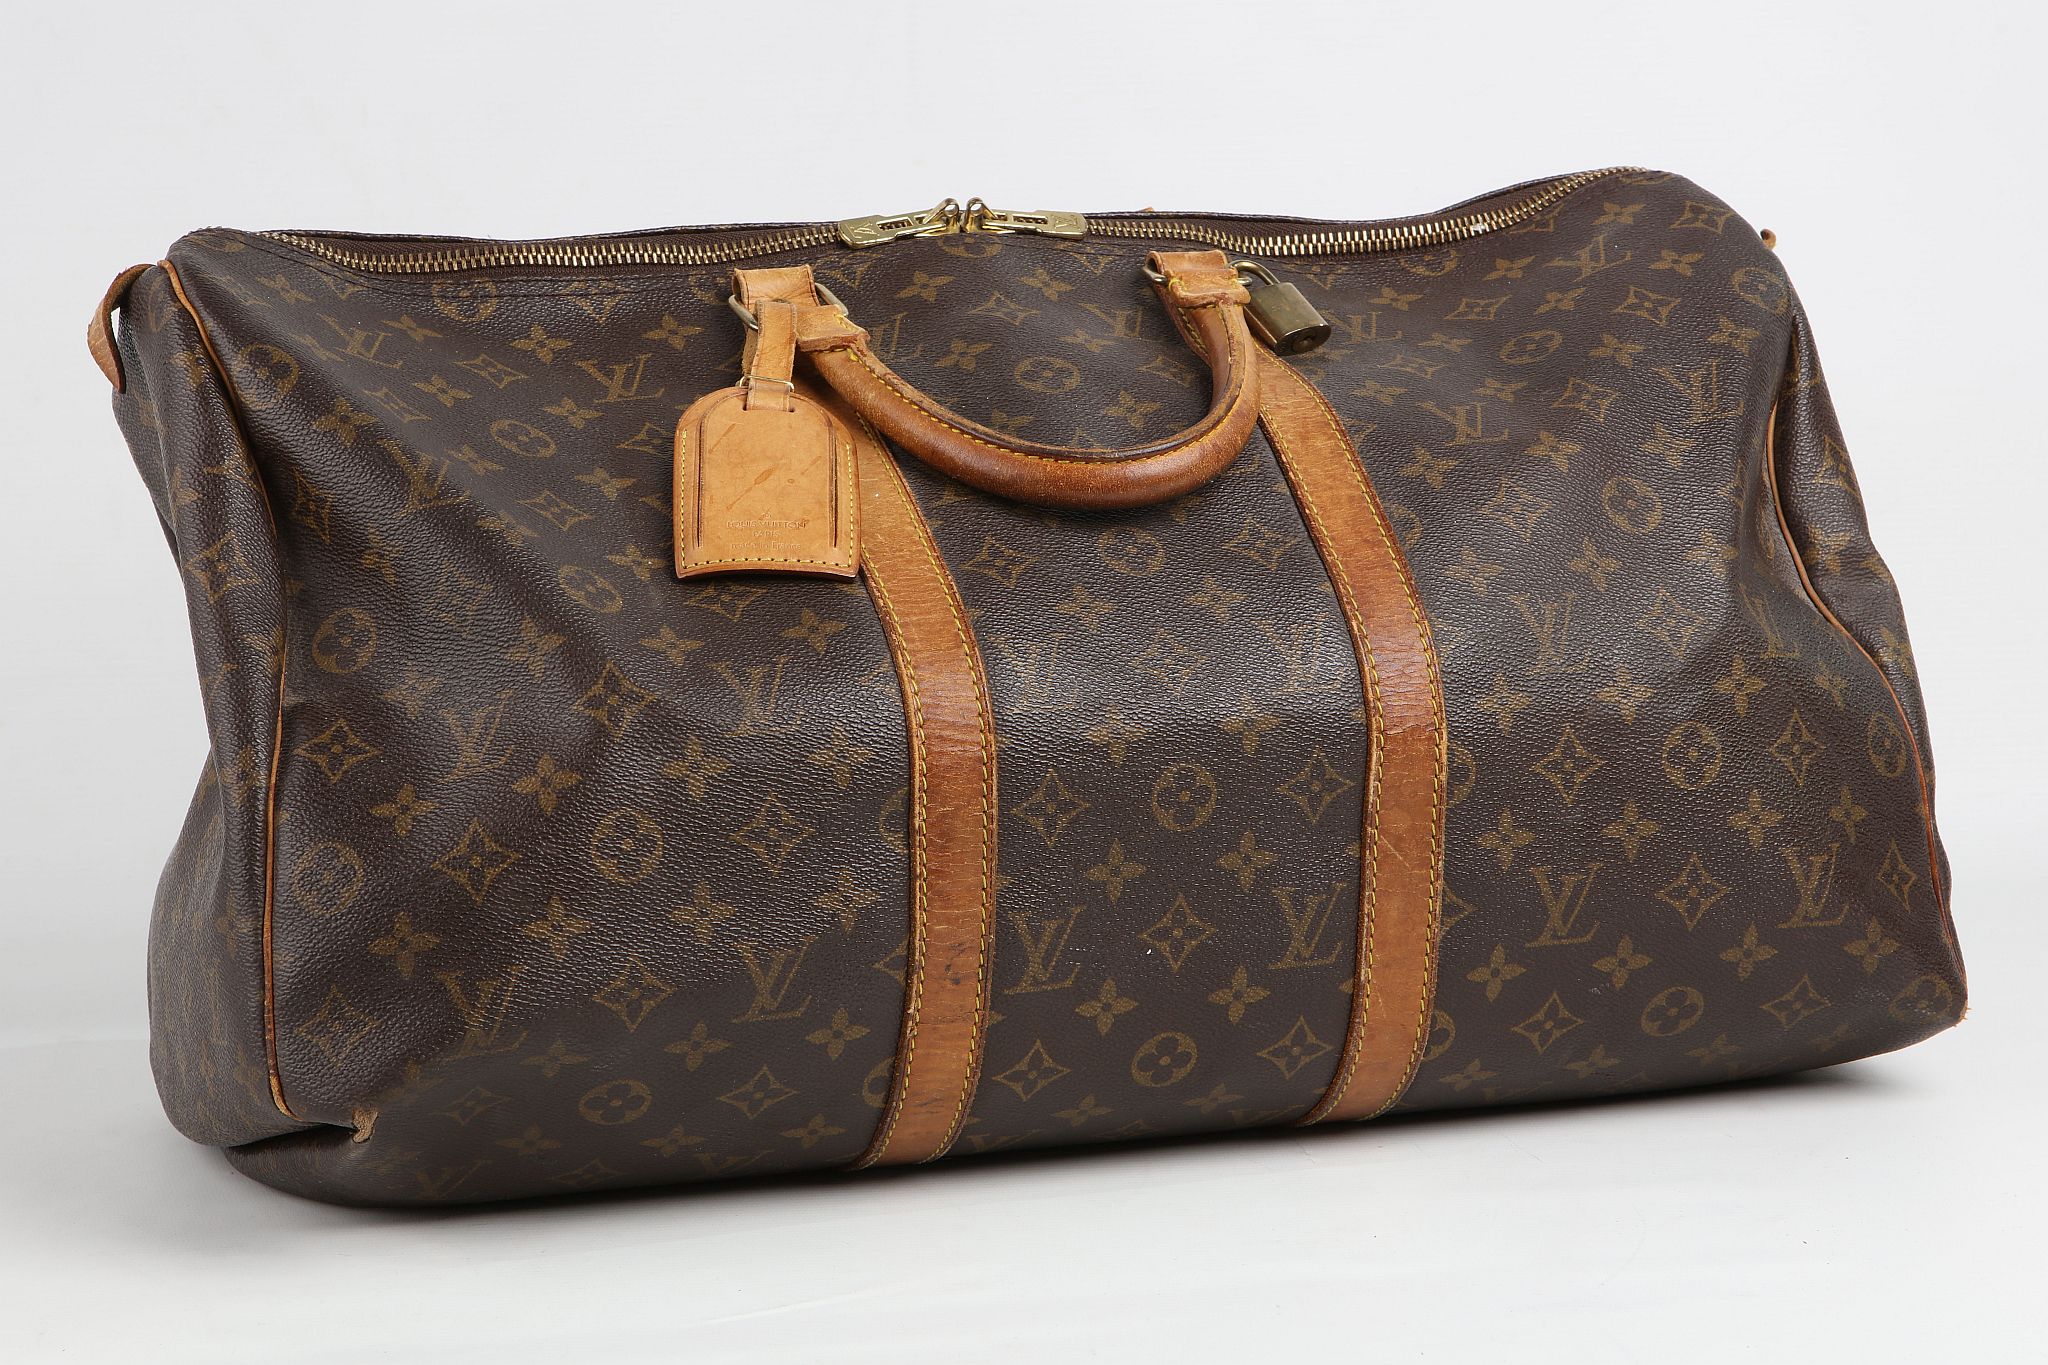 LOUIS VUITTON KEEPALL 50, date code for 1991, monogram canvas with leather trim, 50cm wide, 25cm - Image 2 of 8